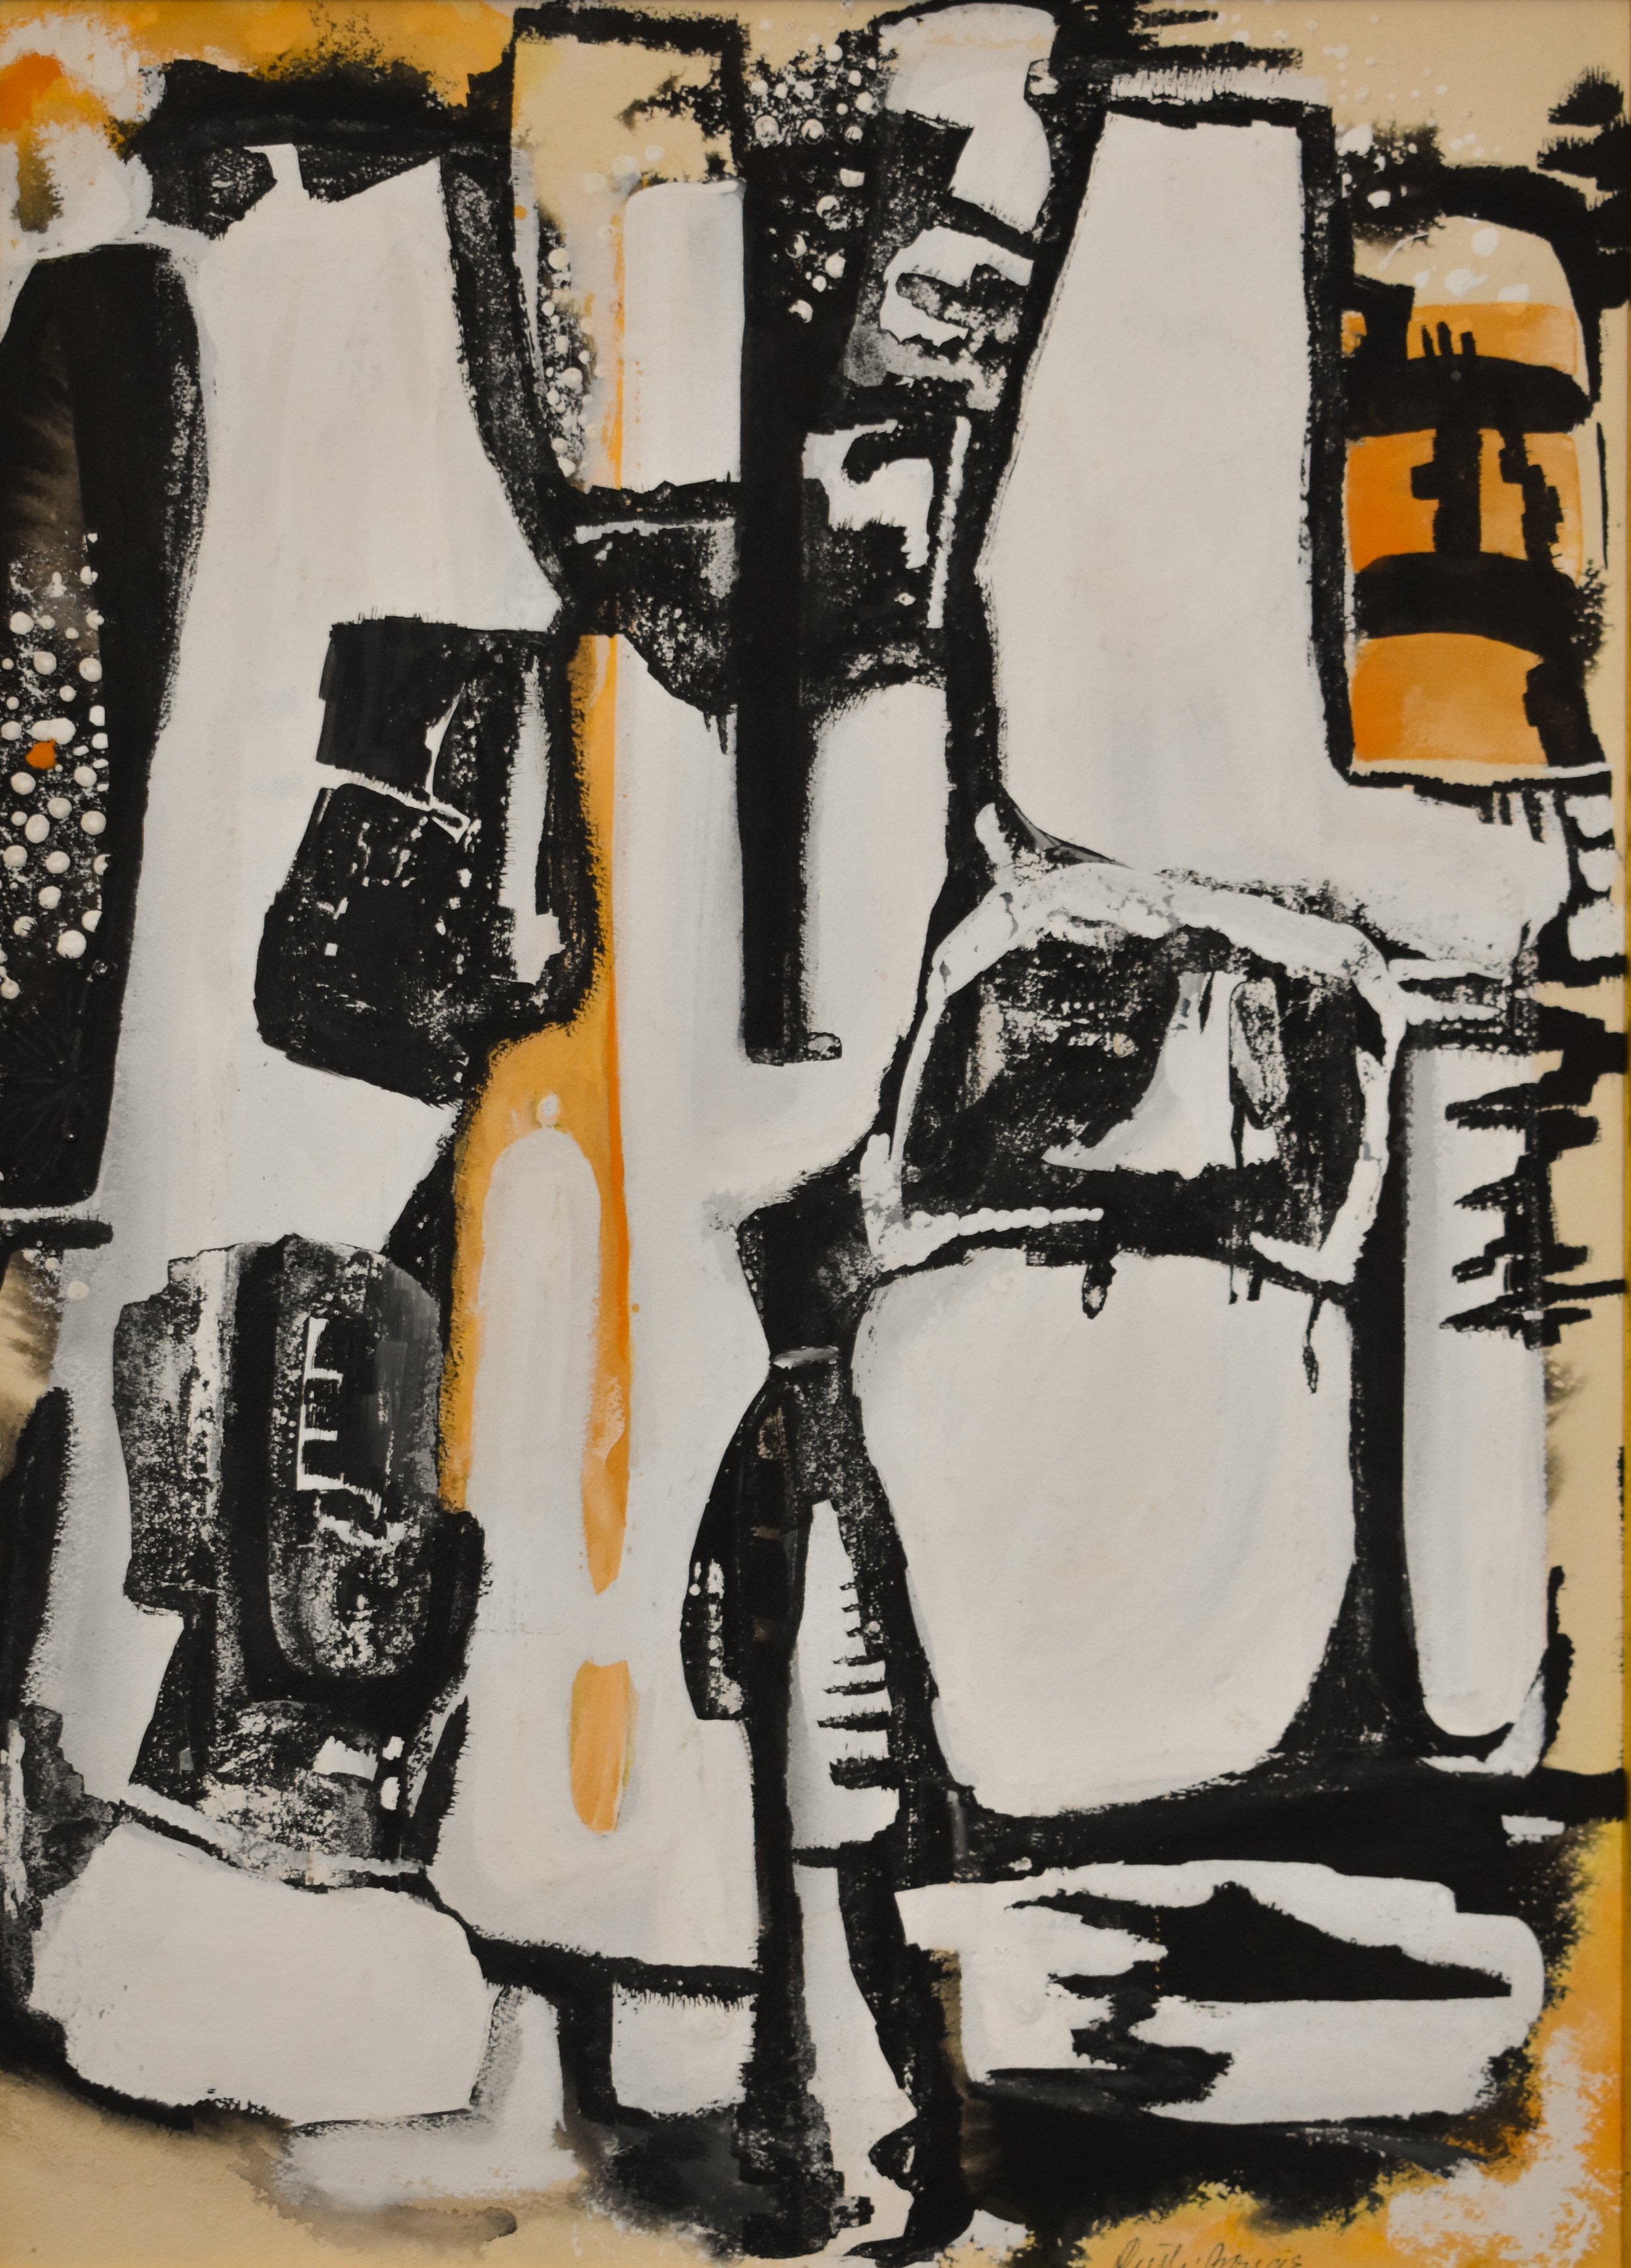  Untitled (Black and White Abstract with Orange), c. 1960  tempera on paper, signed lower right, 20 ¾ x 15 in.  Archivally matted and framed, 33 x 27 in.  